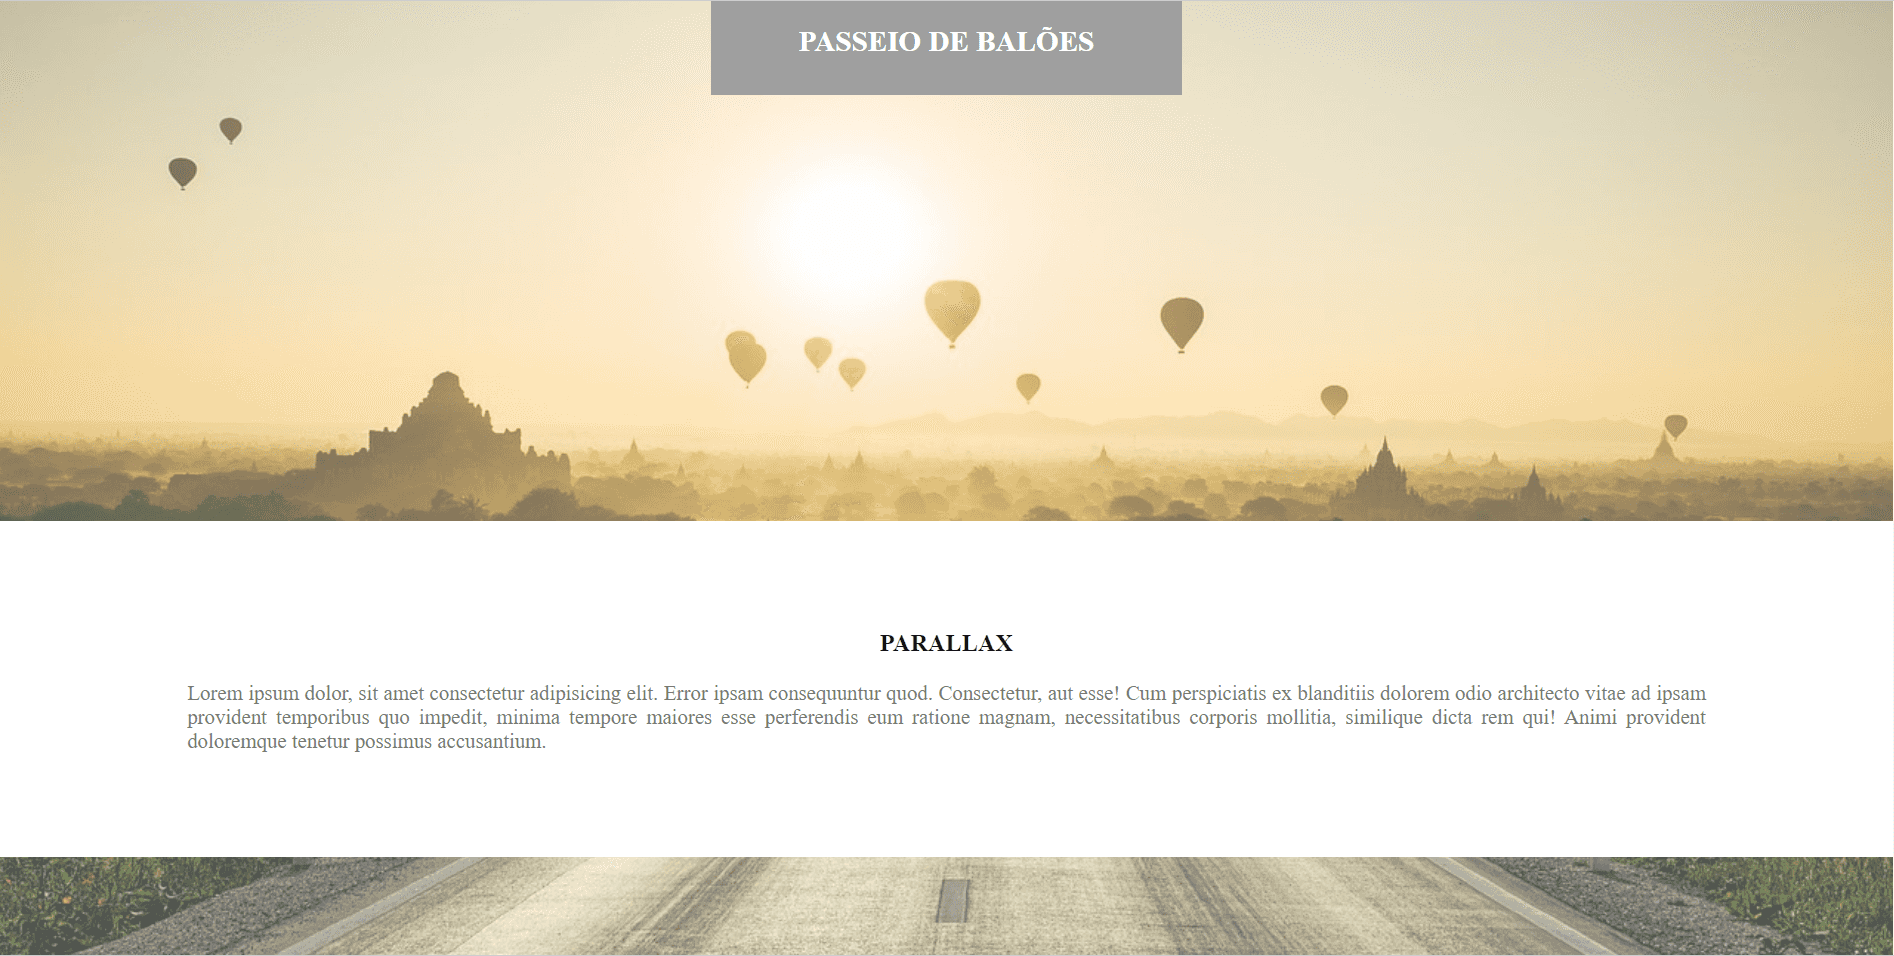 Parallax - Parallax effect using HTML, CSS and JS!